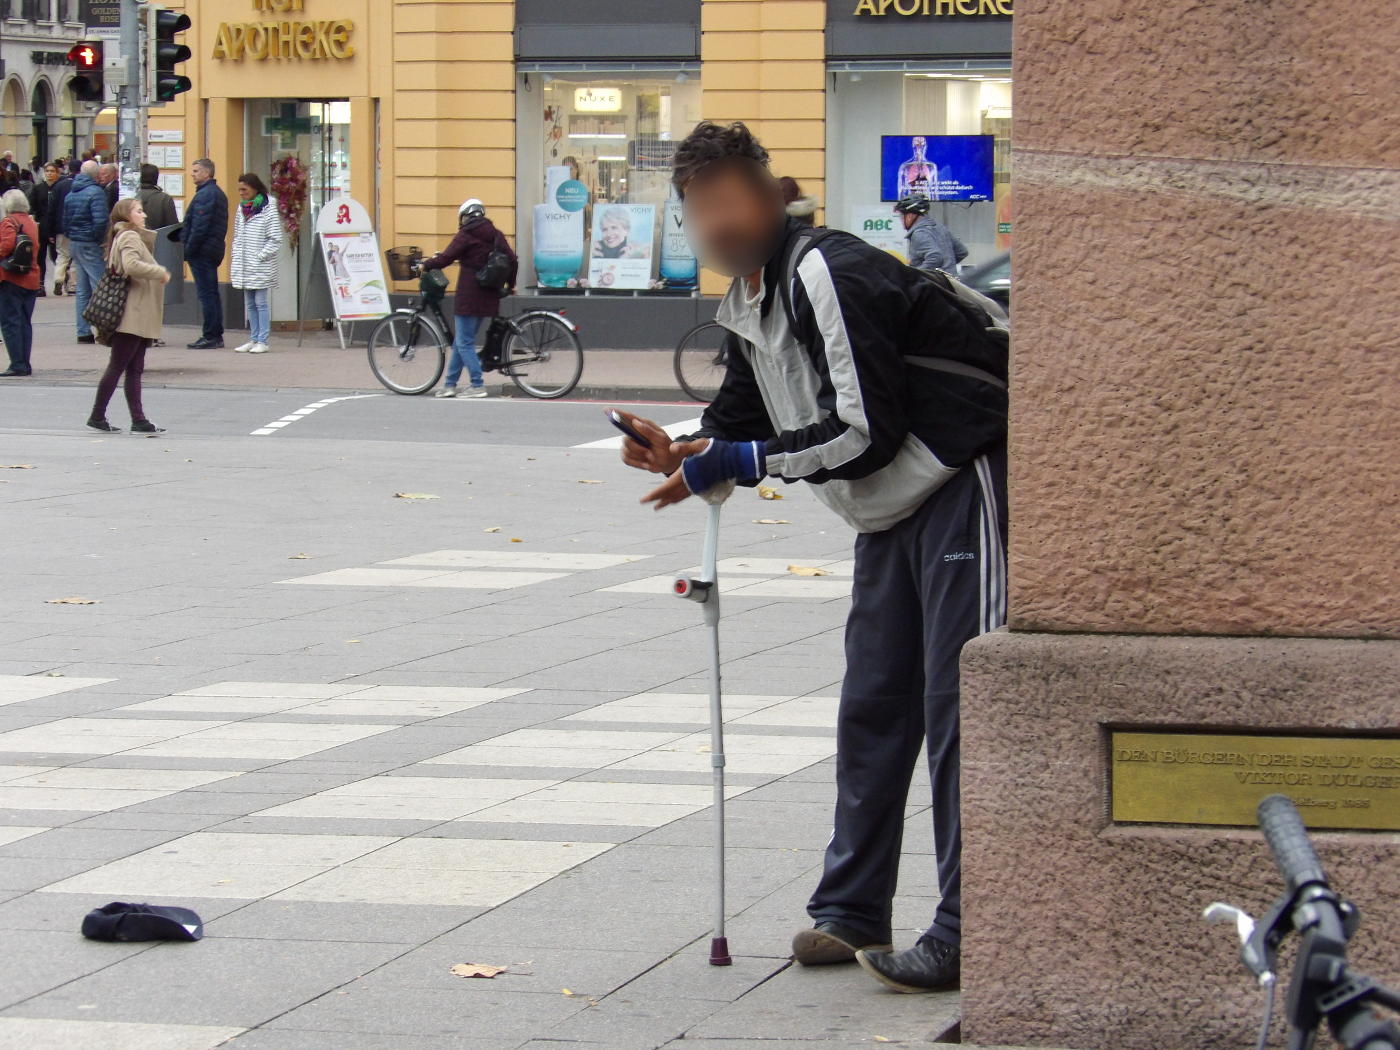 Heidelberg: A Professional Beggar and a Jehovah's Witness